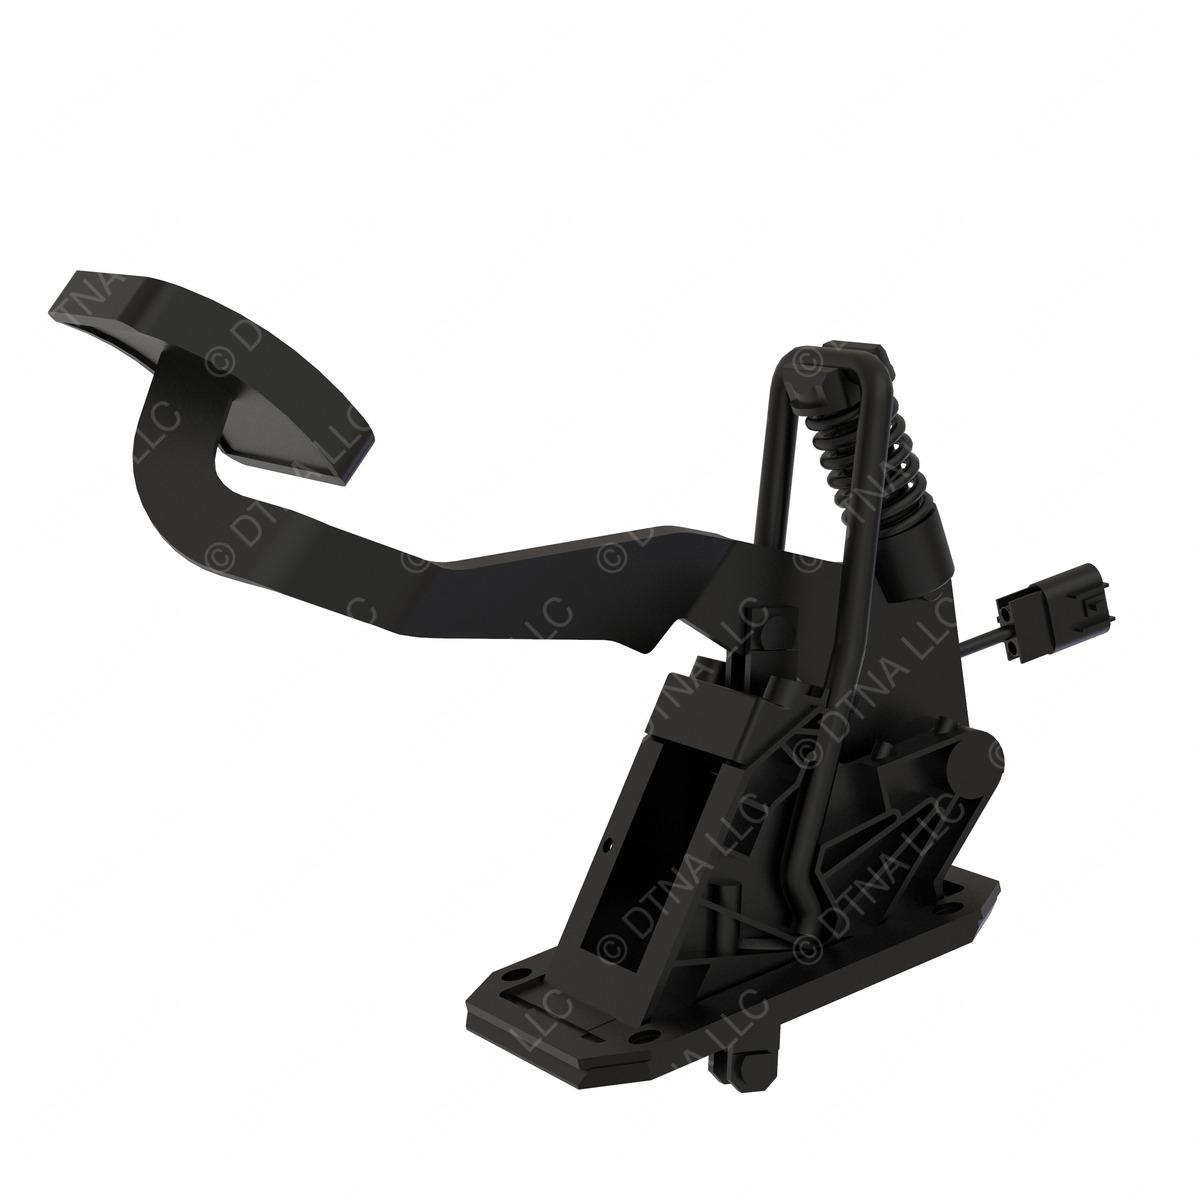 ISO 7000 - 3679, Depress clutch pedal